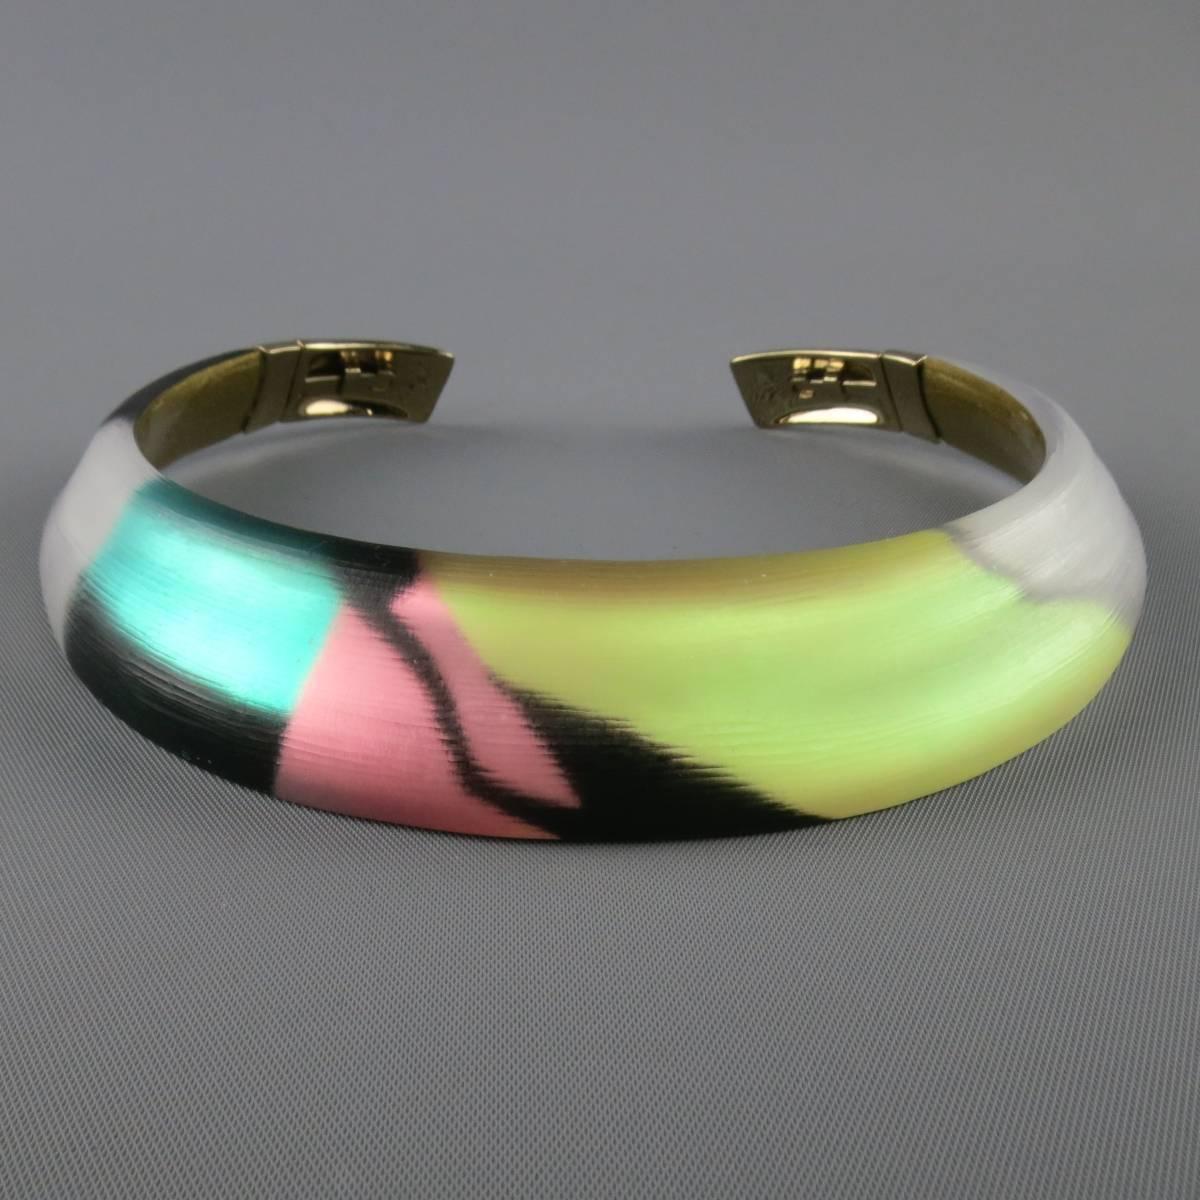 ALEXIS BITTAR neck cuff in a gorgeous frosted lucite with black, white, turquoise, pink, and yellow metallic mosaic print with a gold flake interior and hinged closure.
 
Excellent Pre-Owned Condition.
 
Length: 14 in.
Width: 1 in.